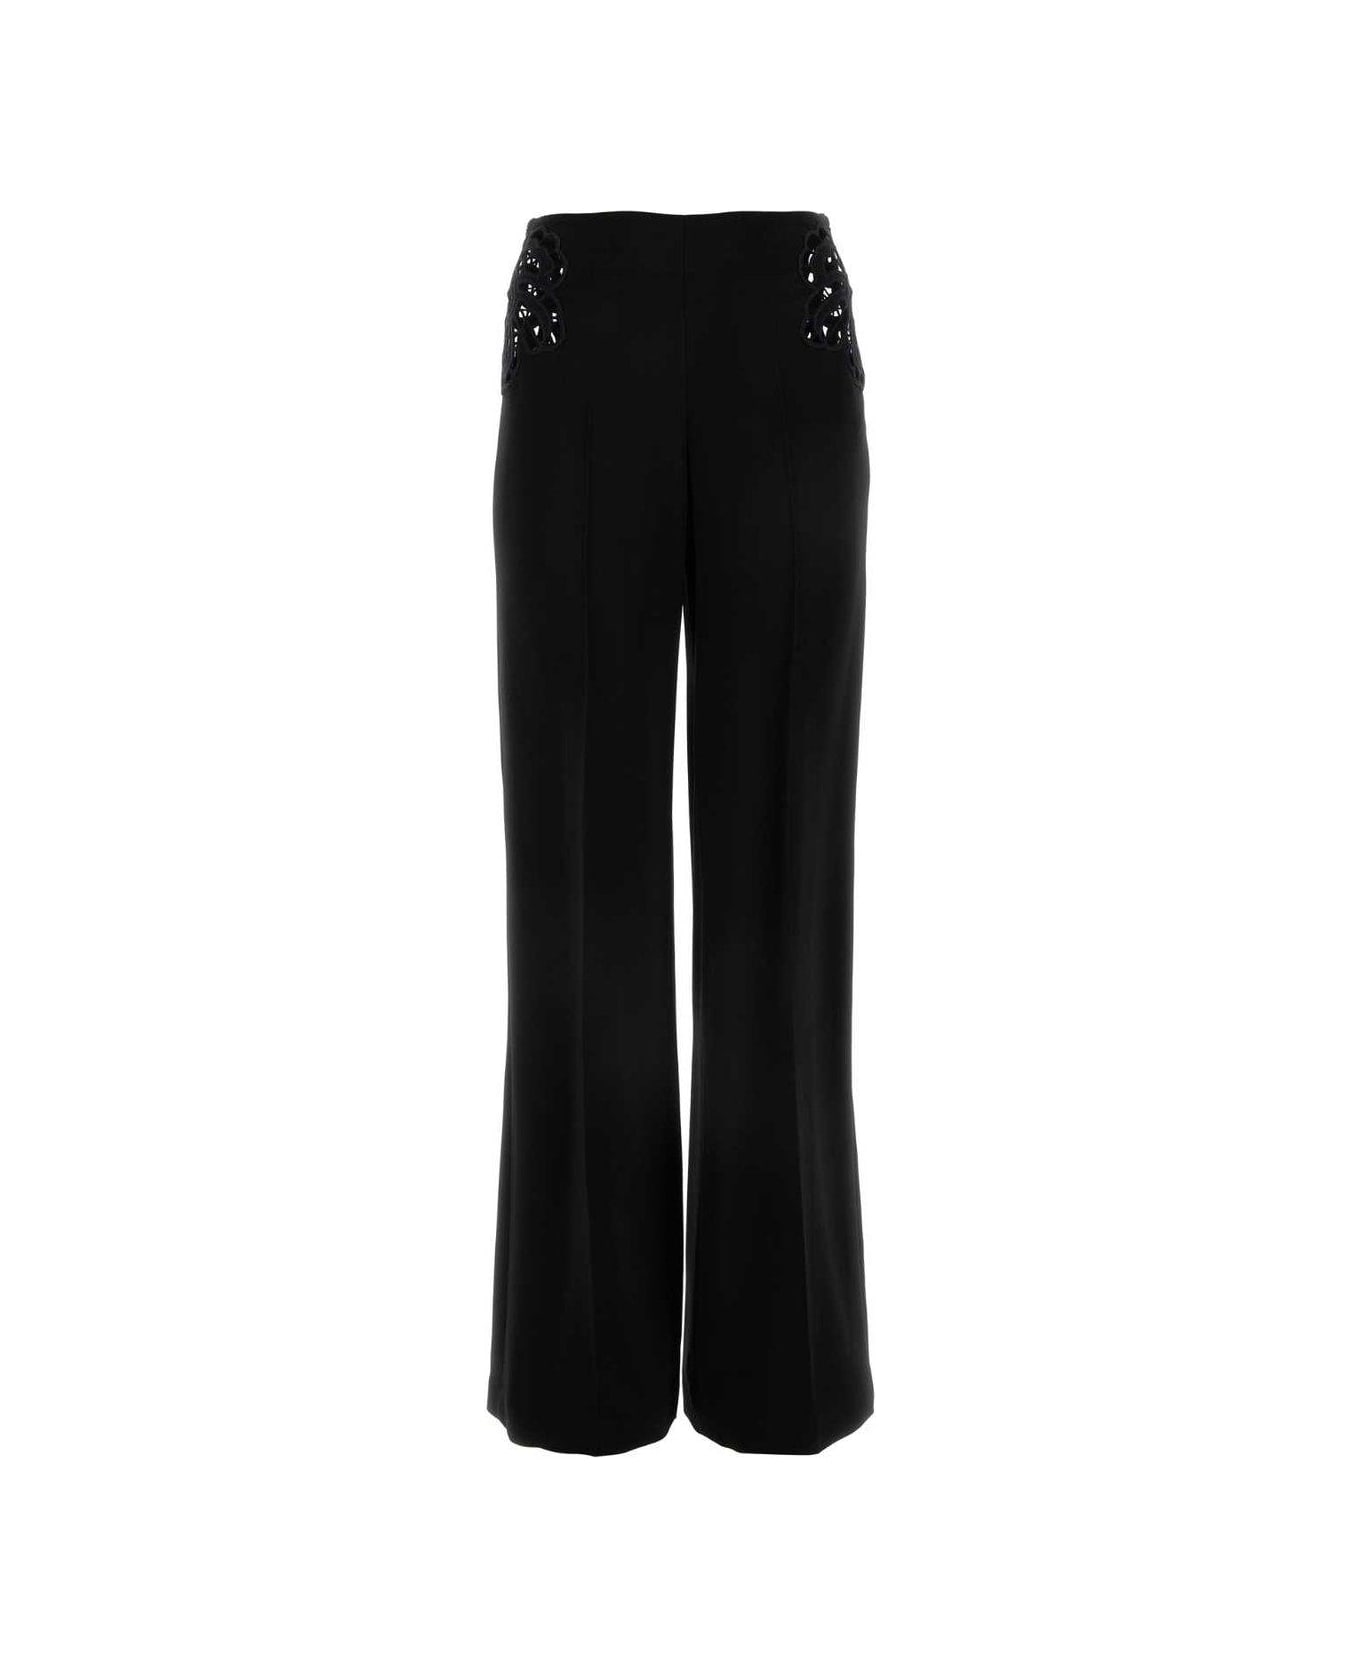 Stella McCartney Broderie-anglaise Tailored Trousers - Black ボトムス